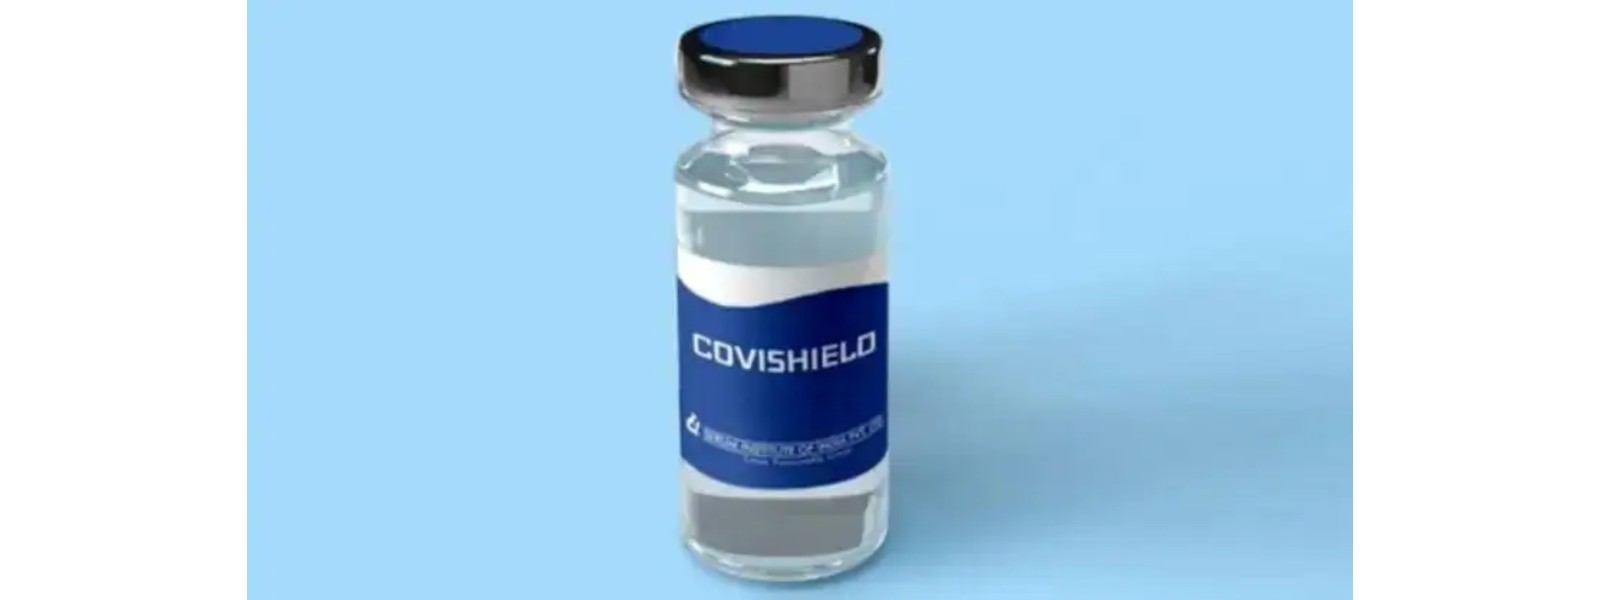 2.5 Mn doses of AstraZeneca Covishield to be ordered from India